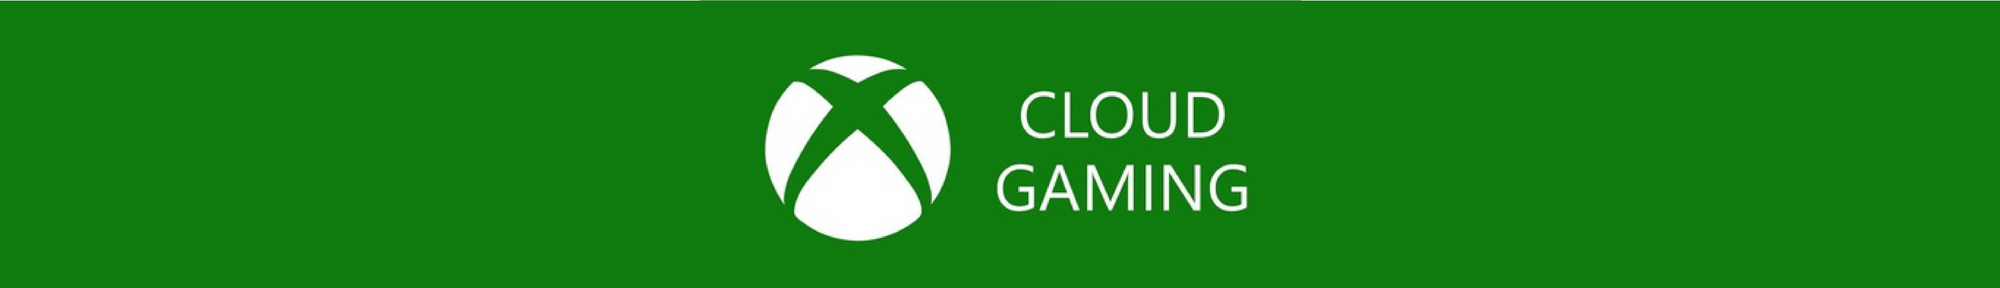 Gambit for XBOX Cloud Gaming to remove lag